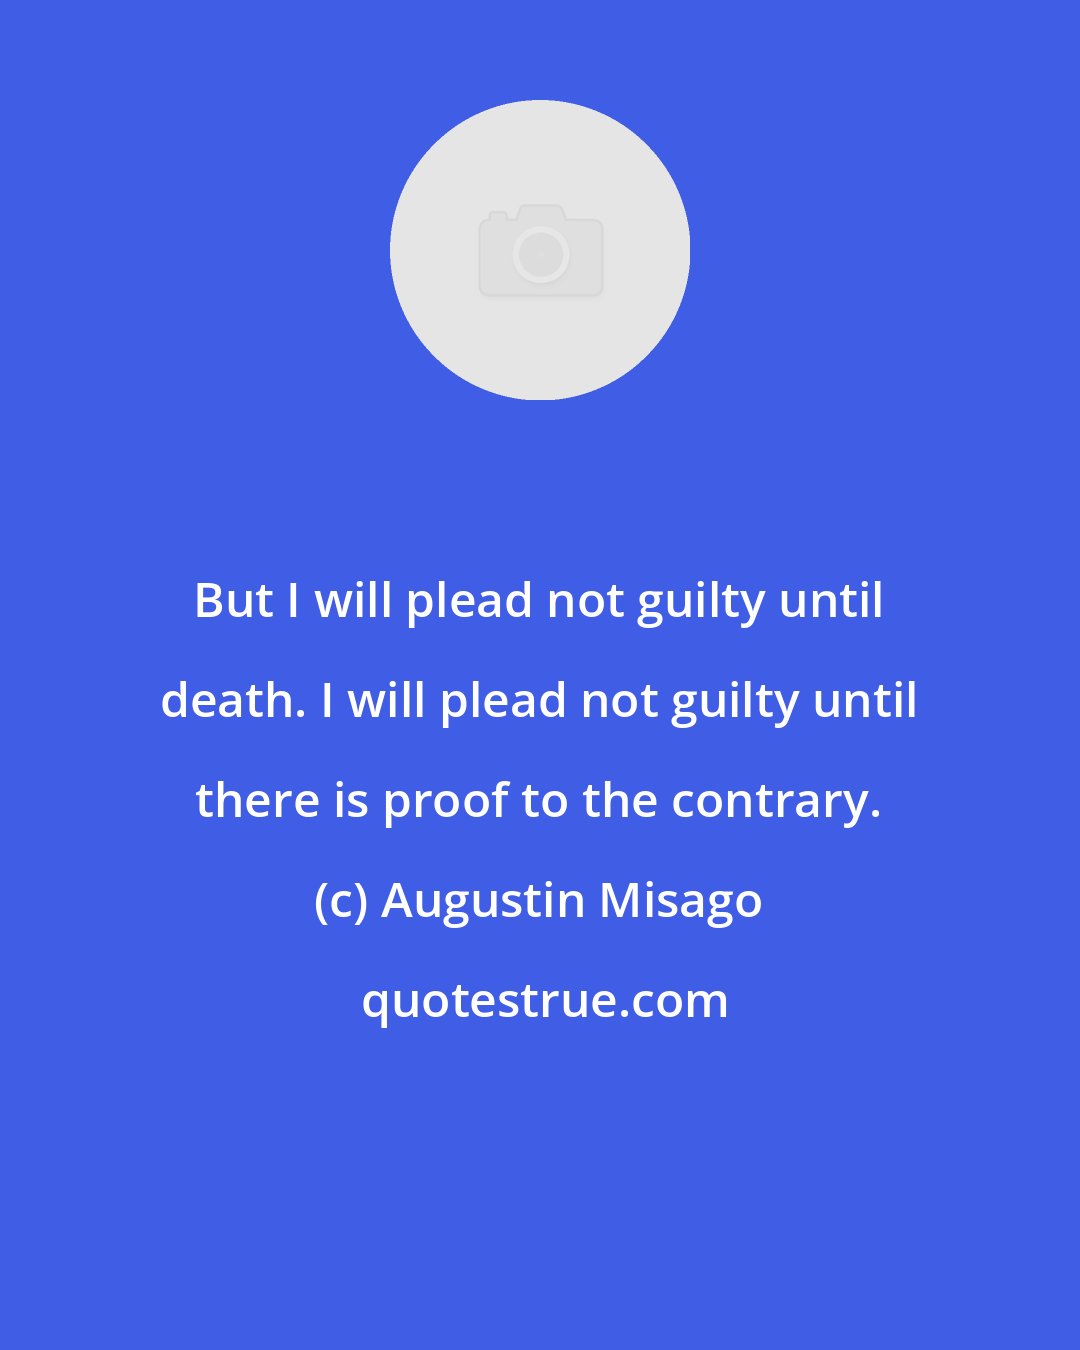 Augustin Misago: But I will plead not guilty until death. I will plead not guilty until there is proof to the contrary.